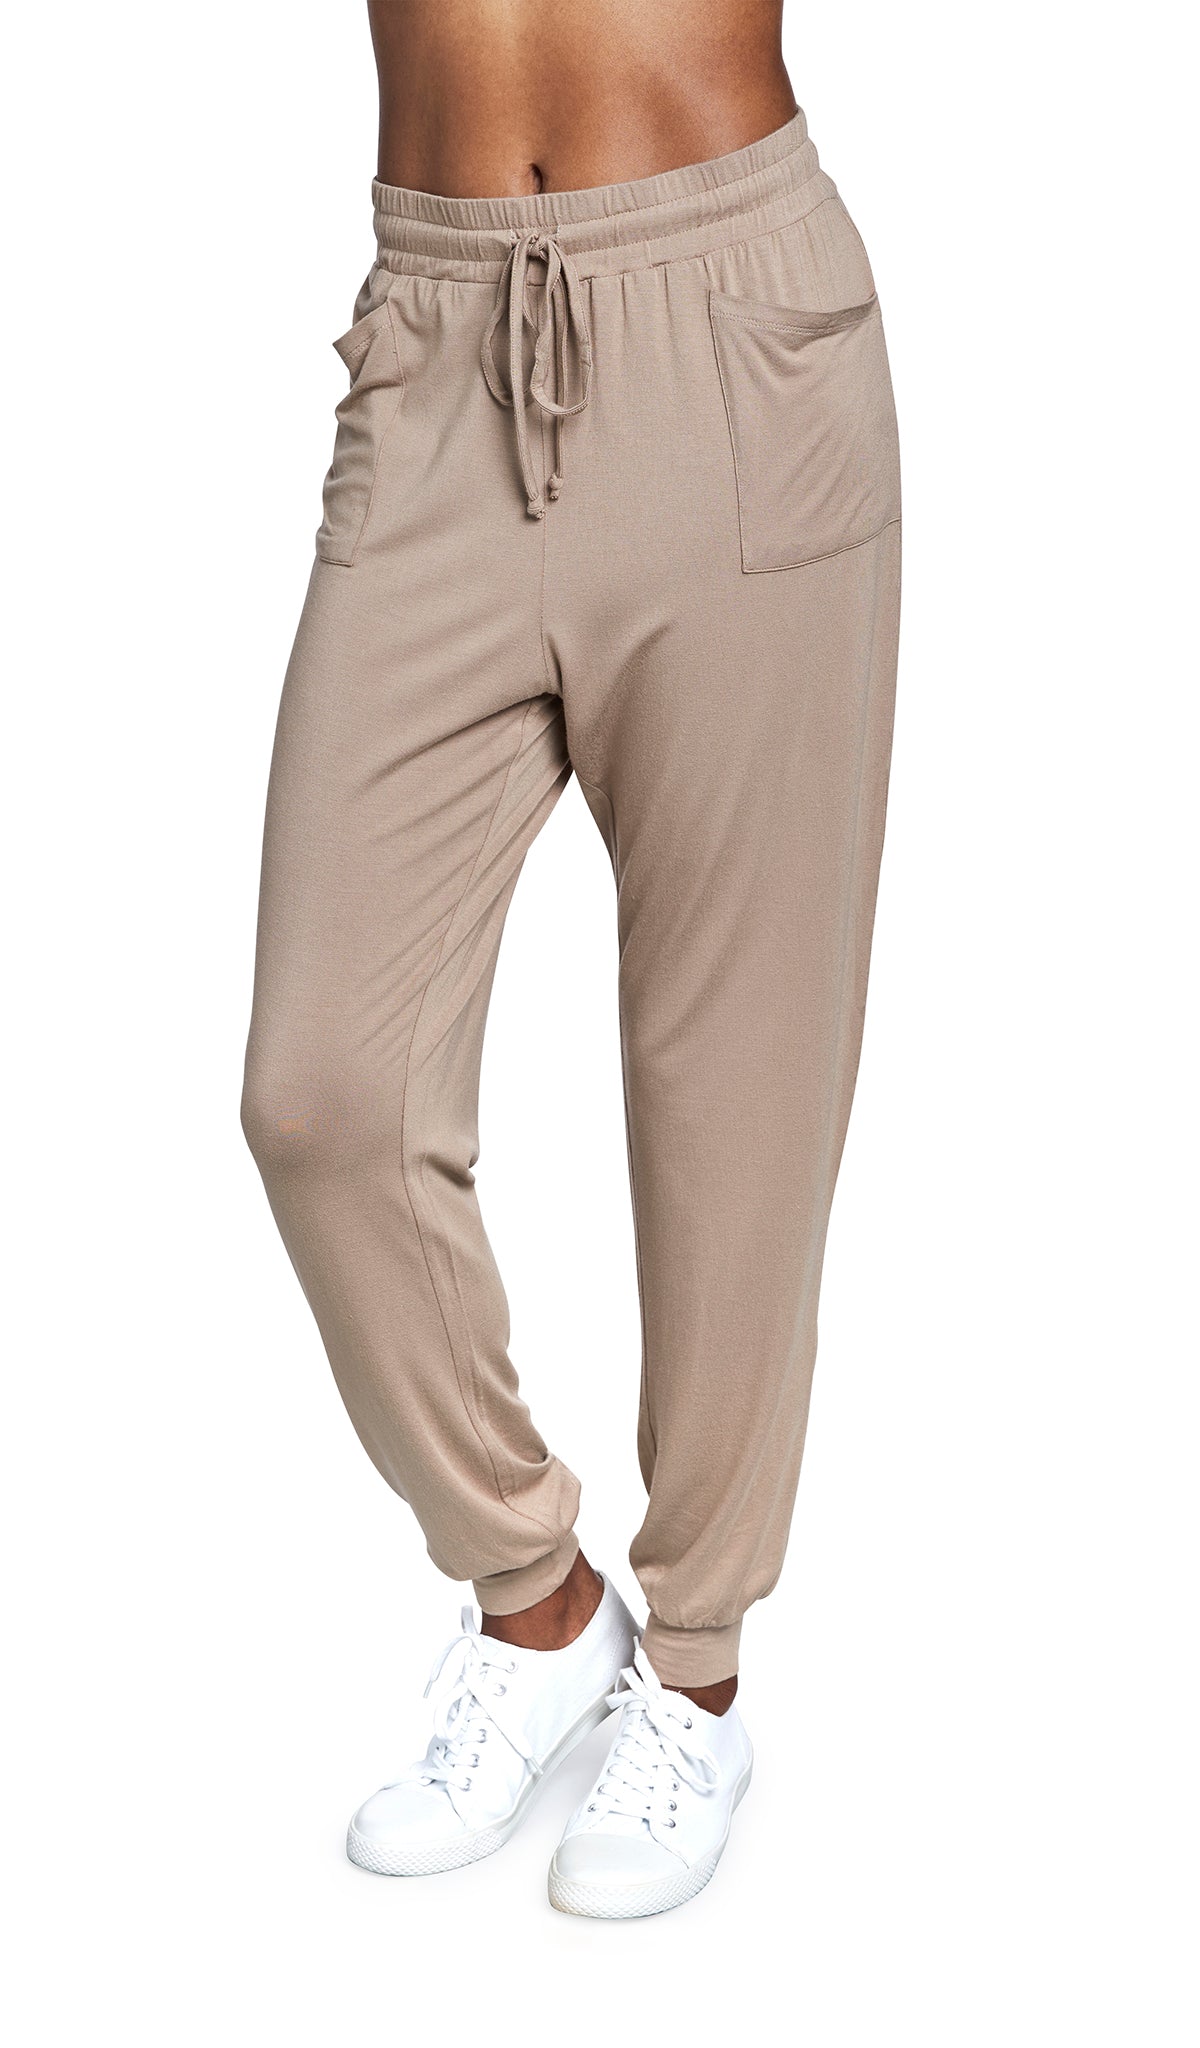 Latte Carmen Jogger on figure, waist down with two front pockets, elastic drawstring waist and cuff hem.